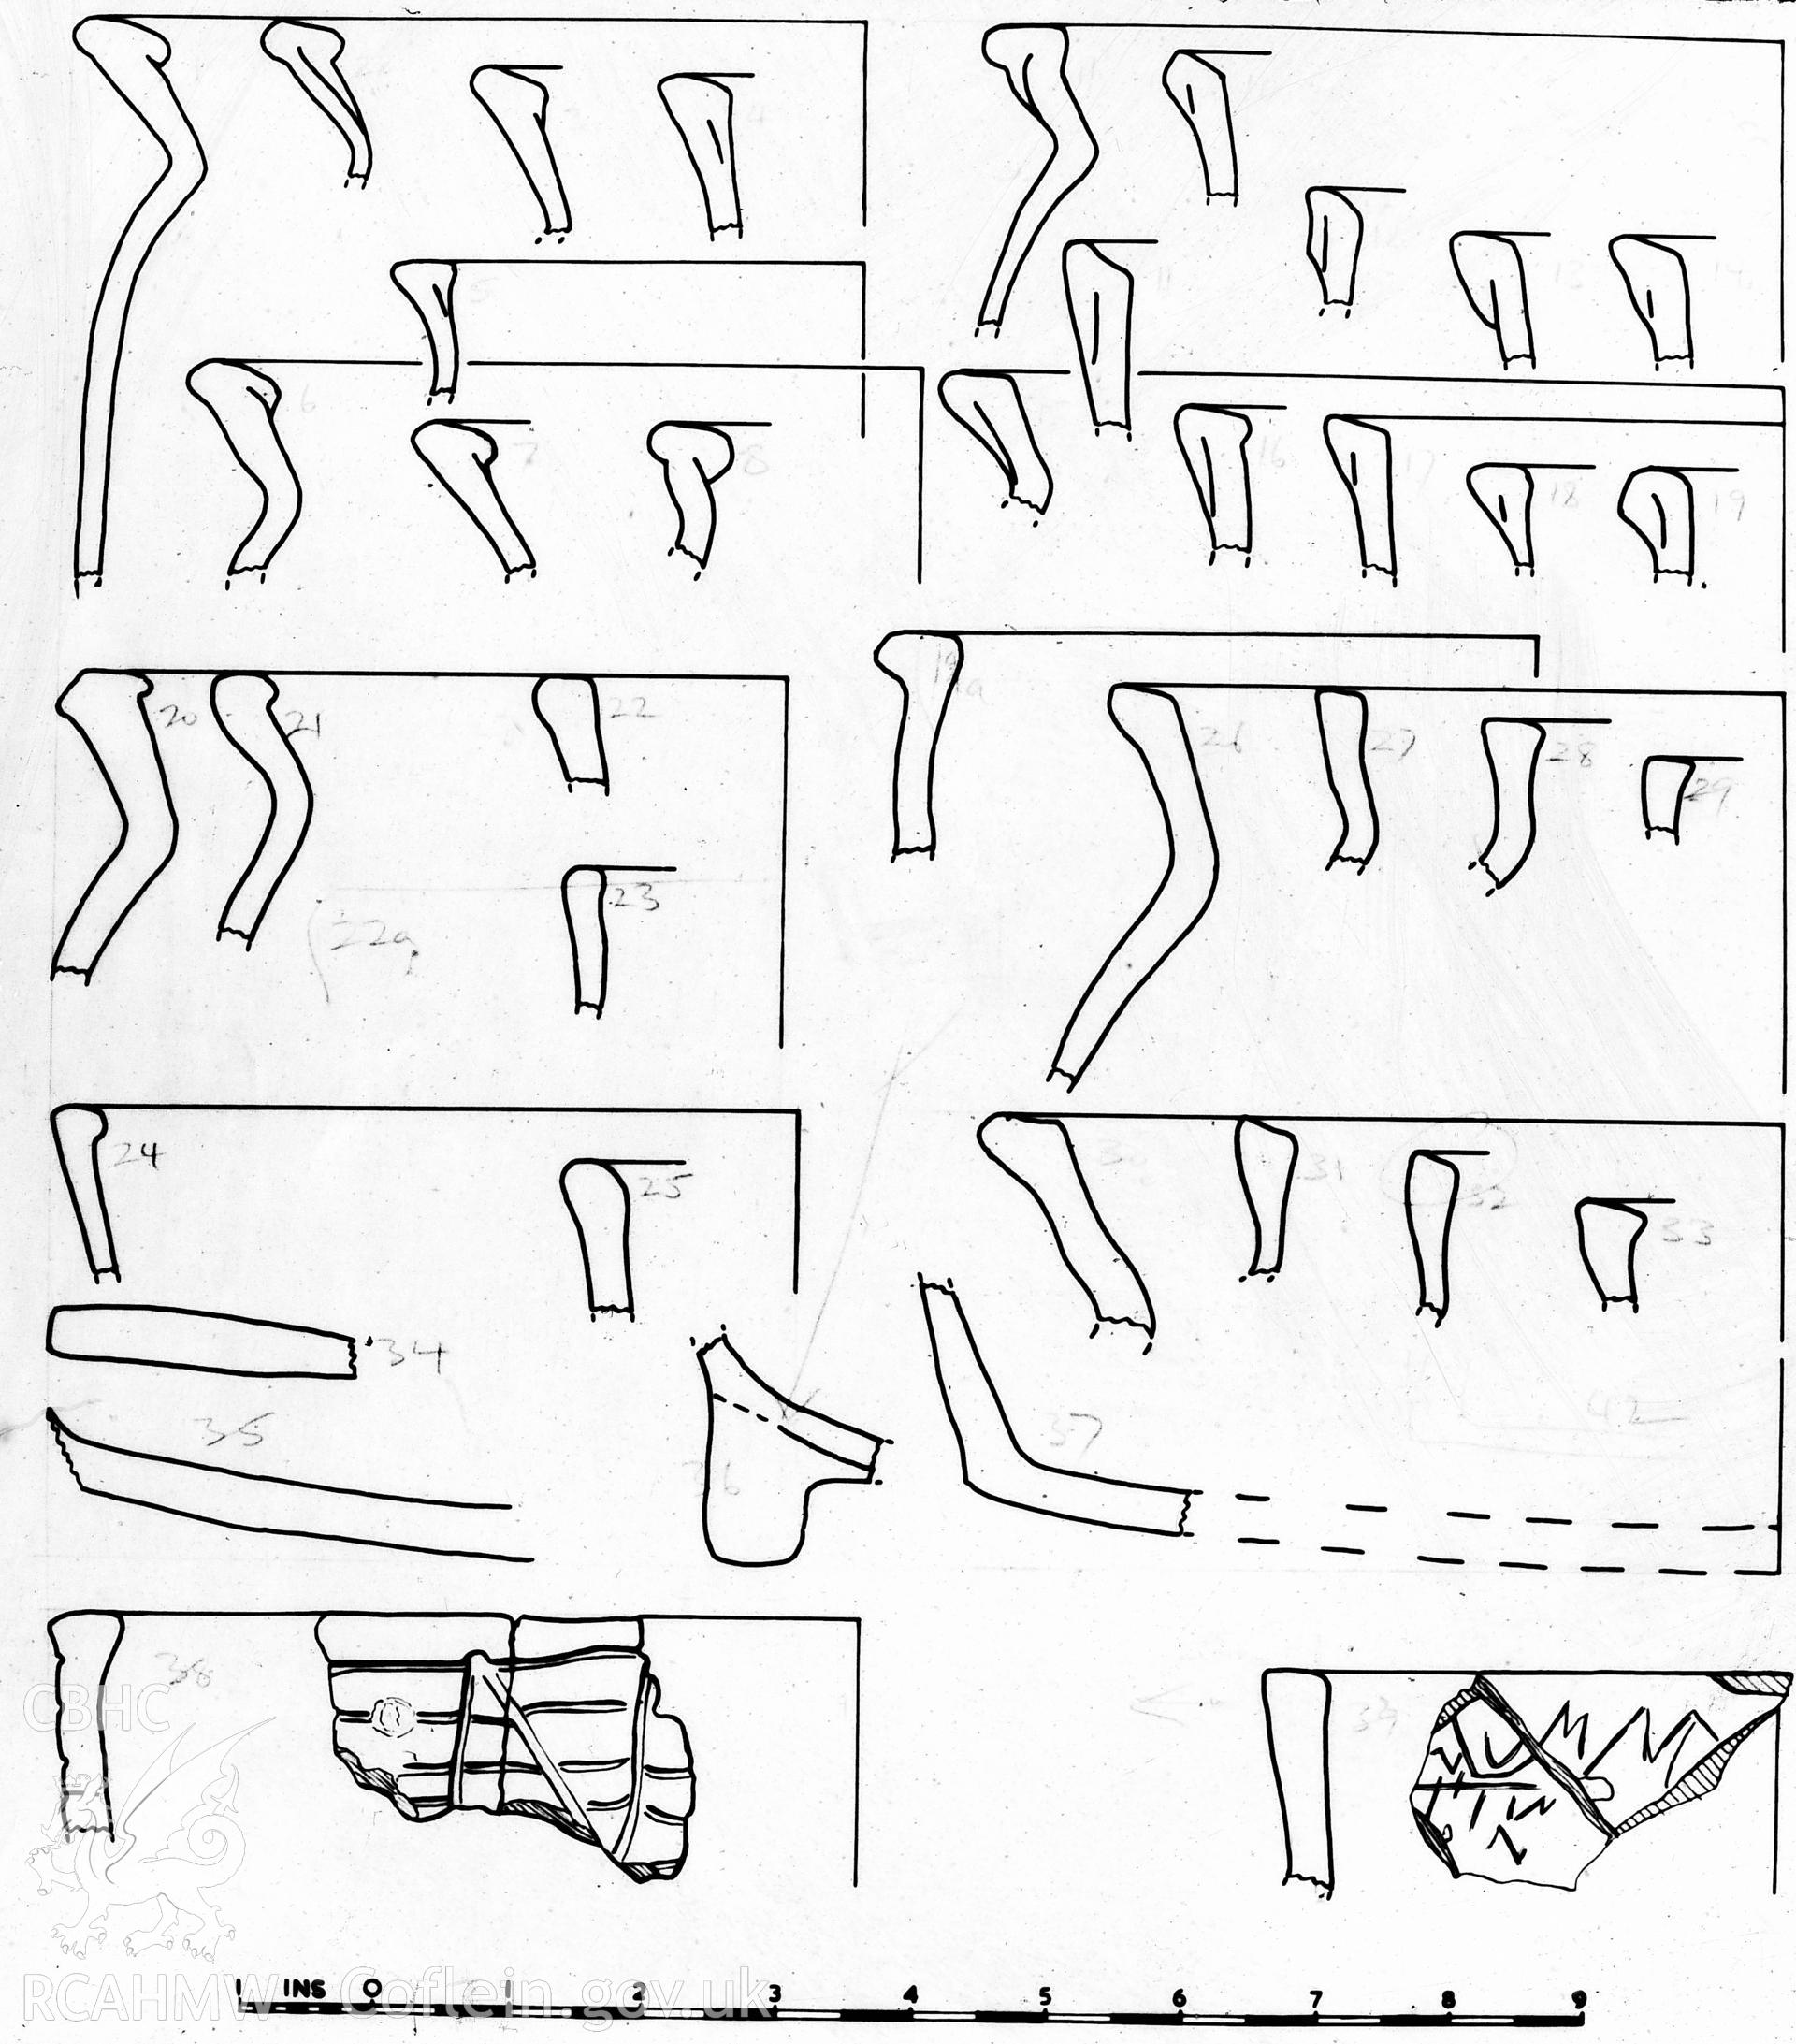 Digitized copy of a pen and ink drawing of pottery sherds and comparitive rim profiles from Tan y Castell (Old Aberystwyth Castle). From an uncatalogued and undated original in the C.H. Houlder Collection.